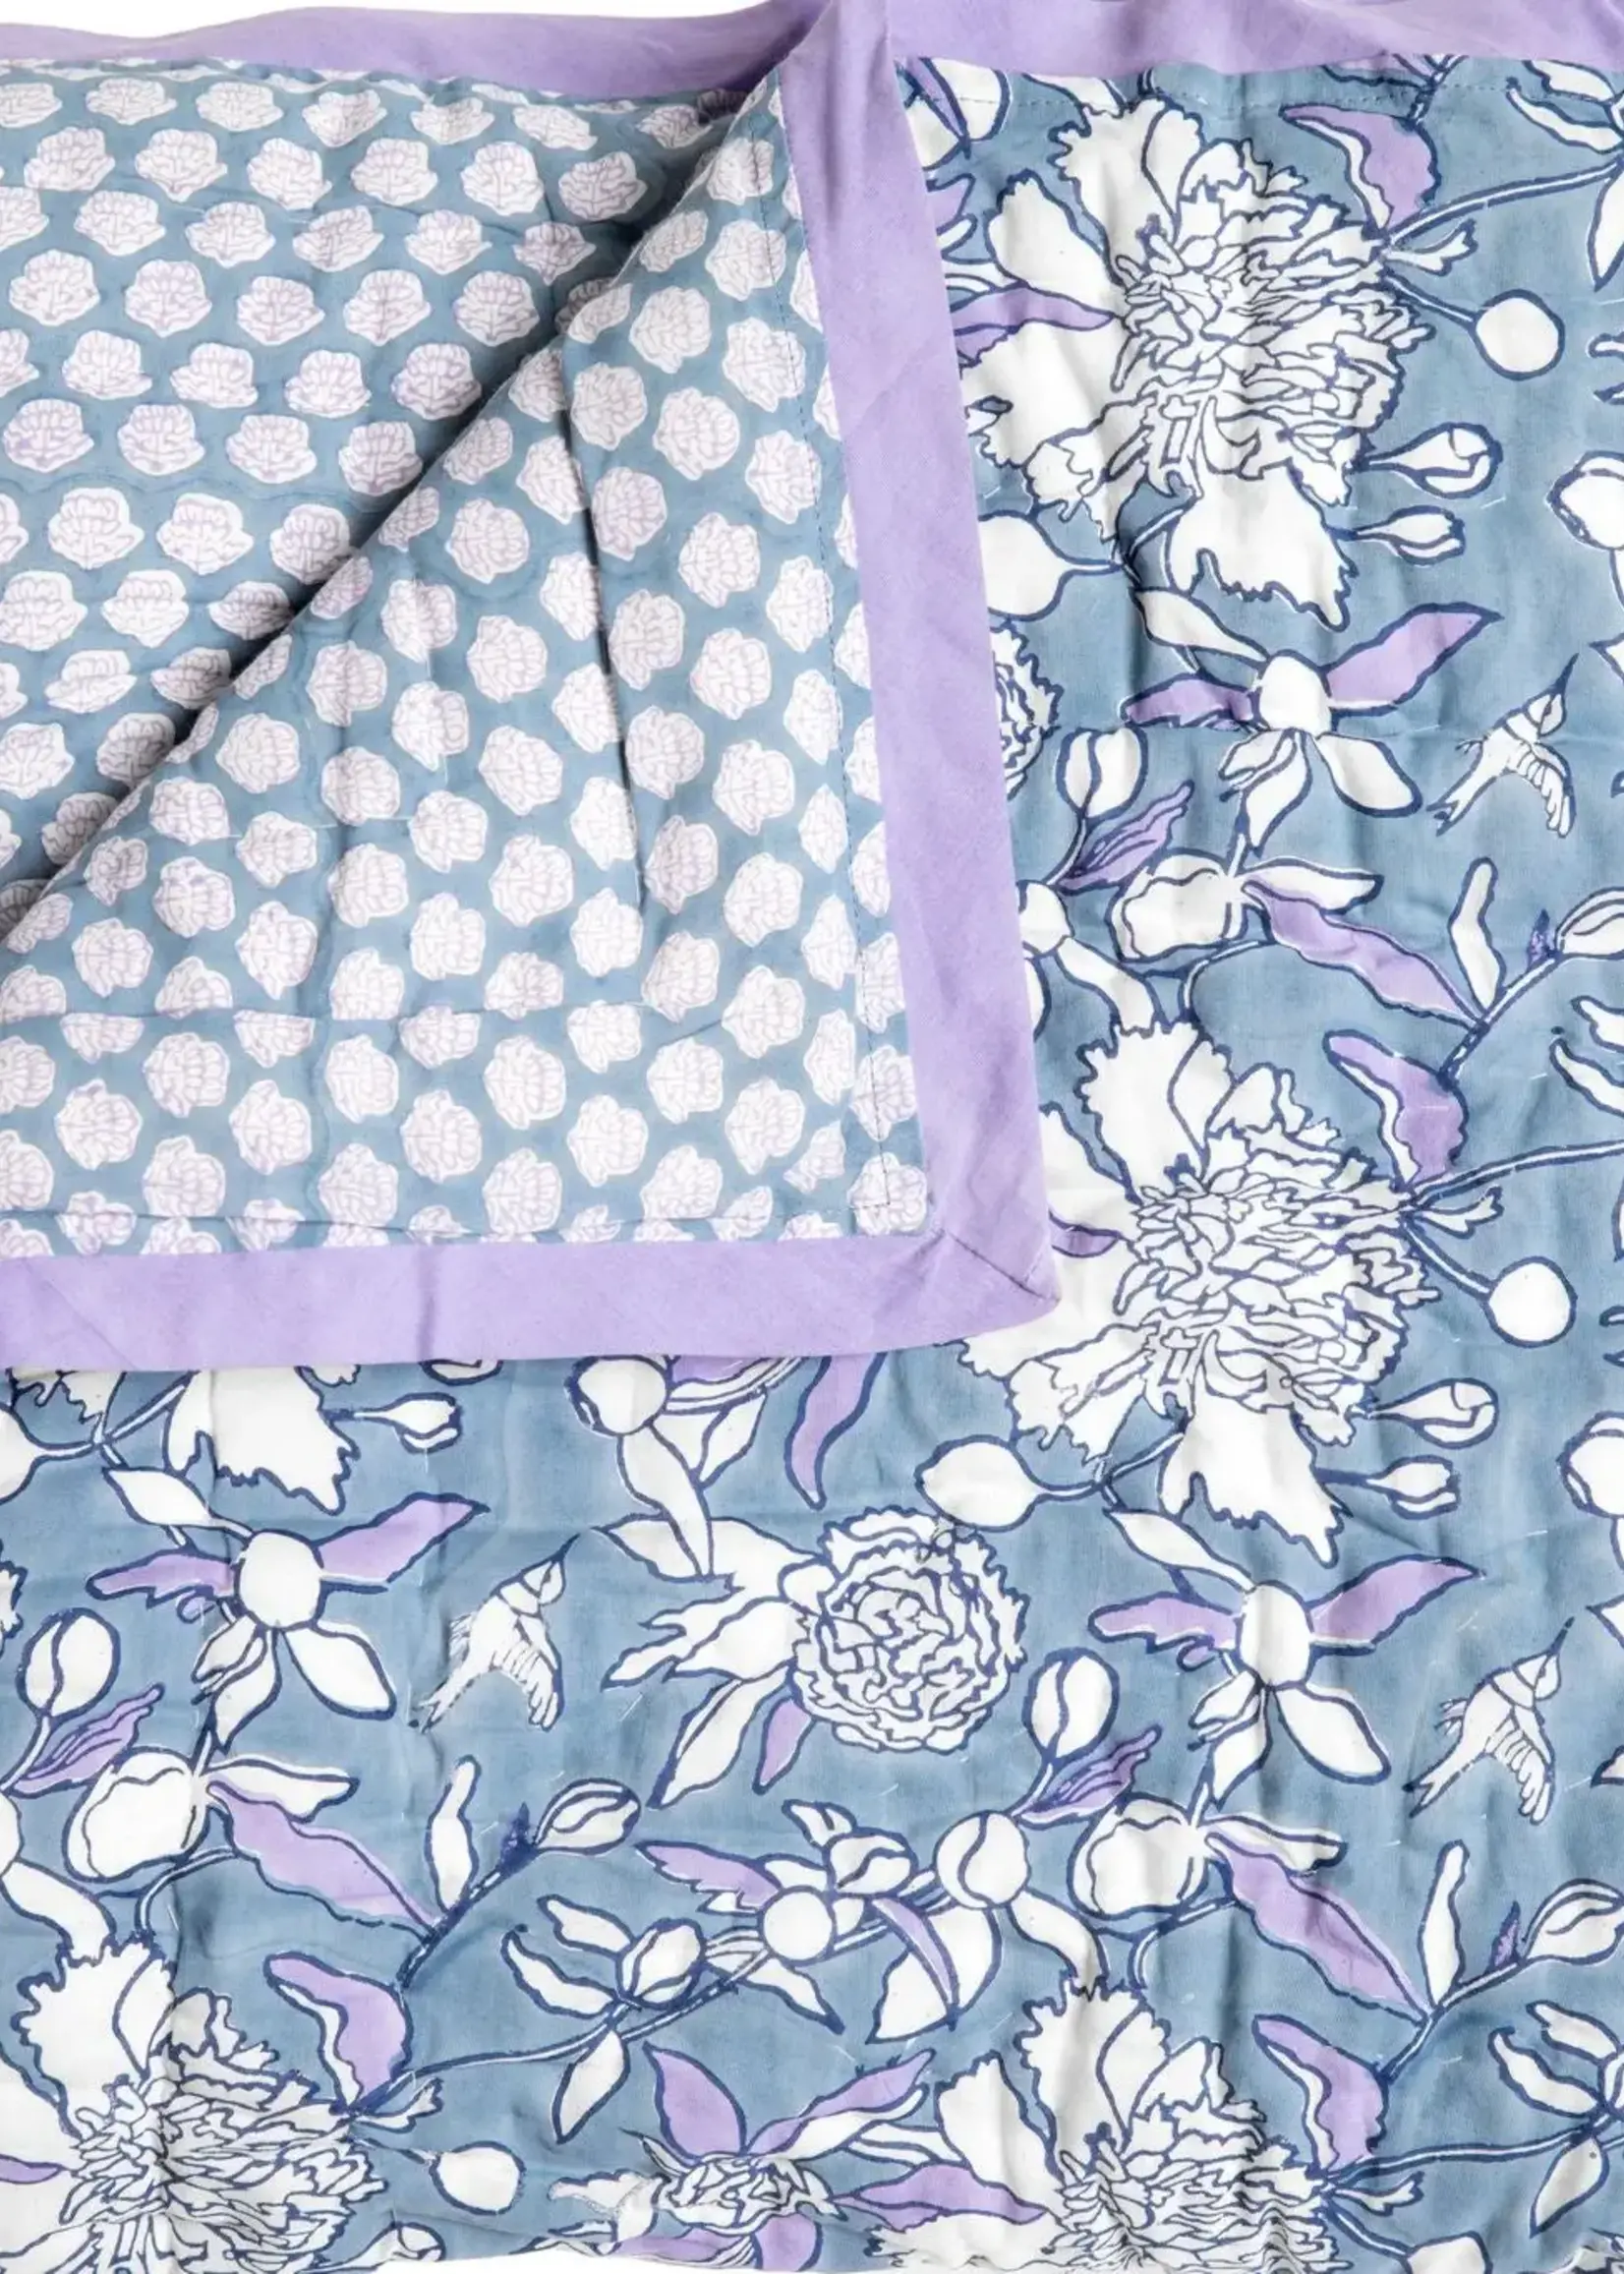 Cardamon Designs Peony Quilt in Violet Throw